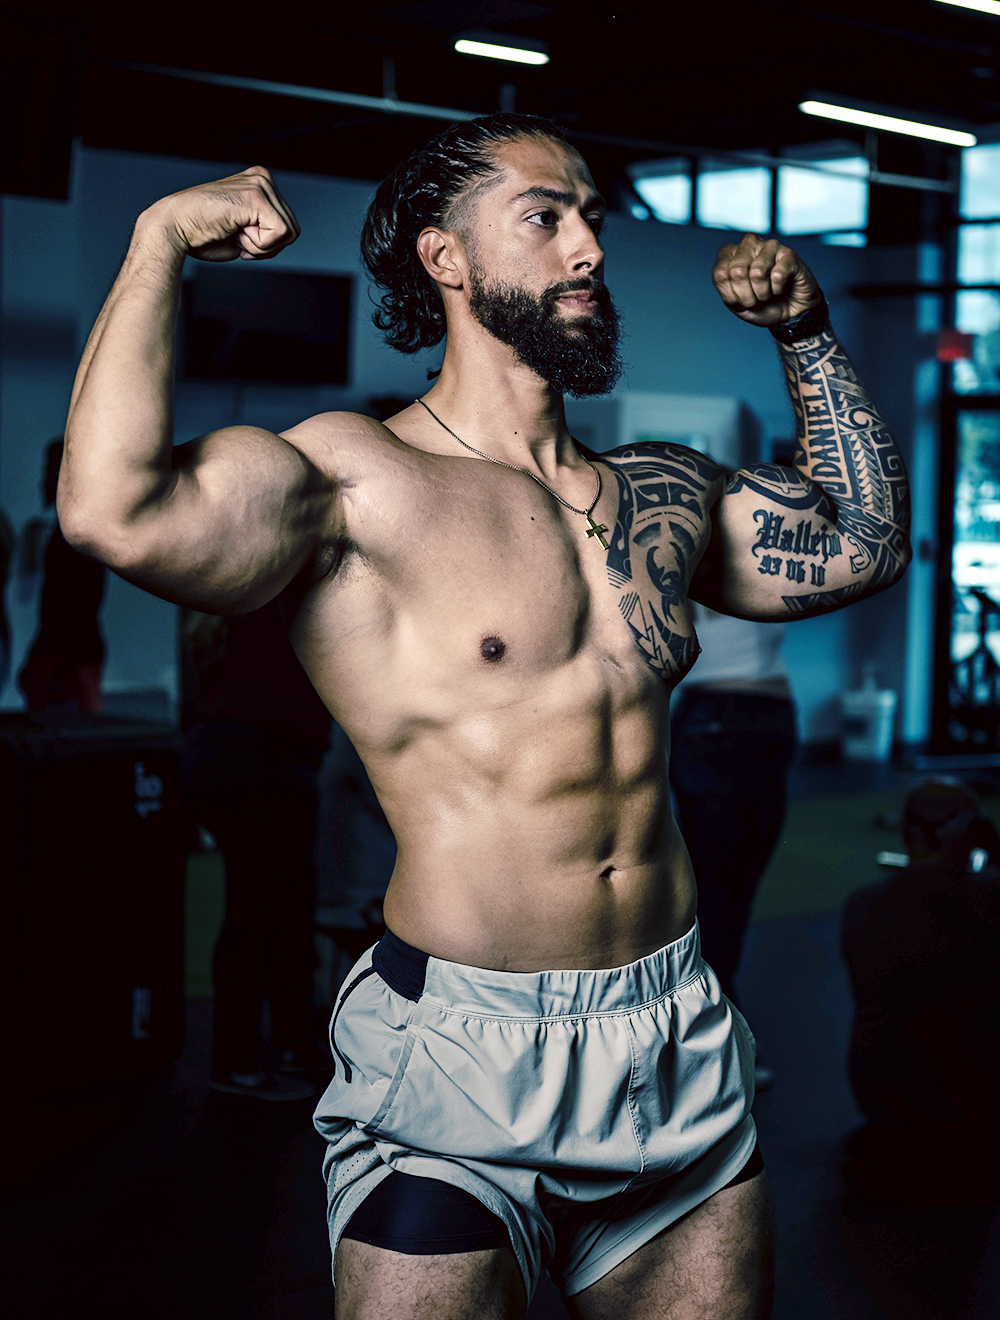 Jacked Bodybuilder Flexing at Gym with Tattoos